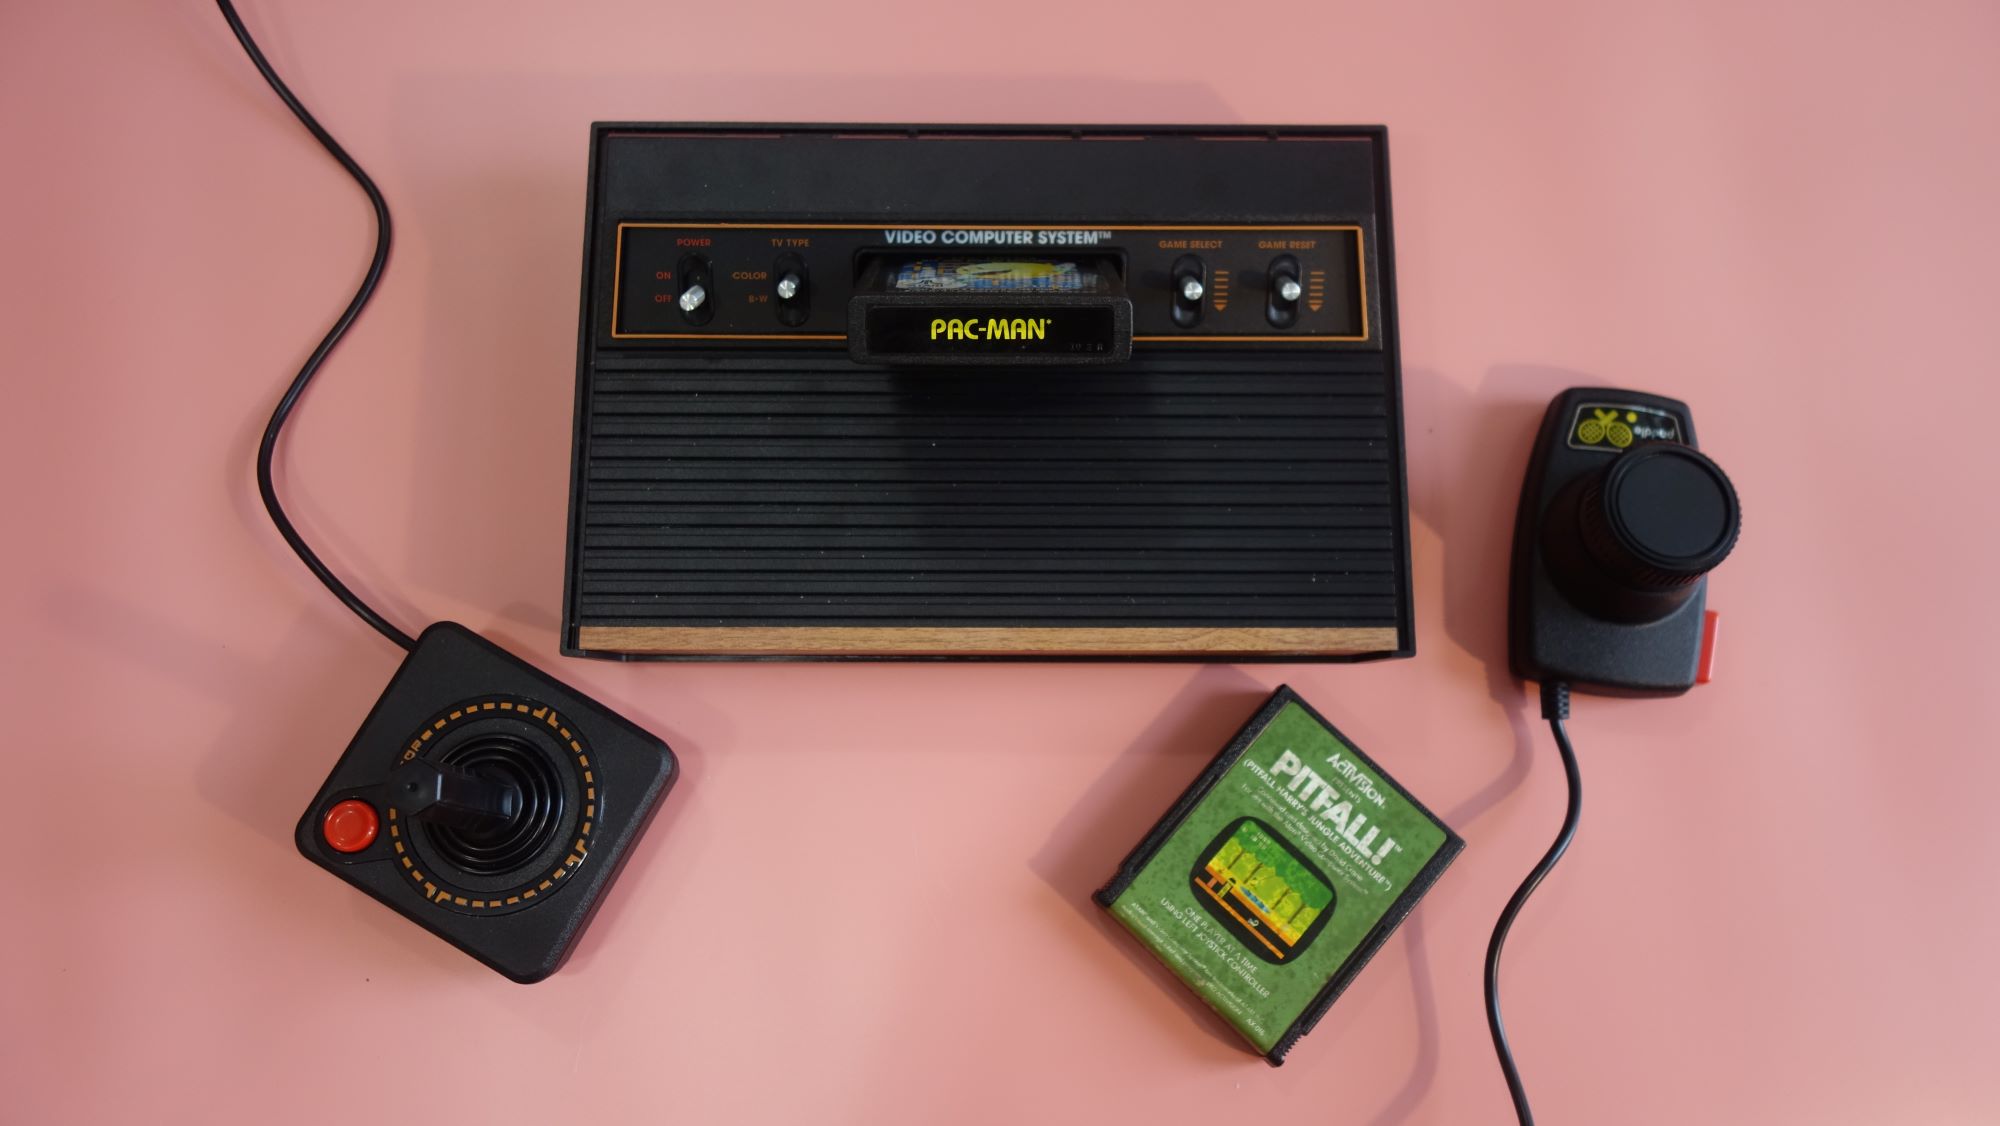 The Atari 2600+ is the retro video game console of my dreams